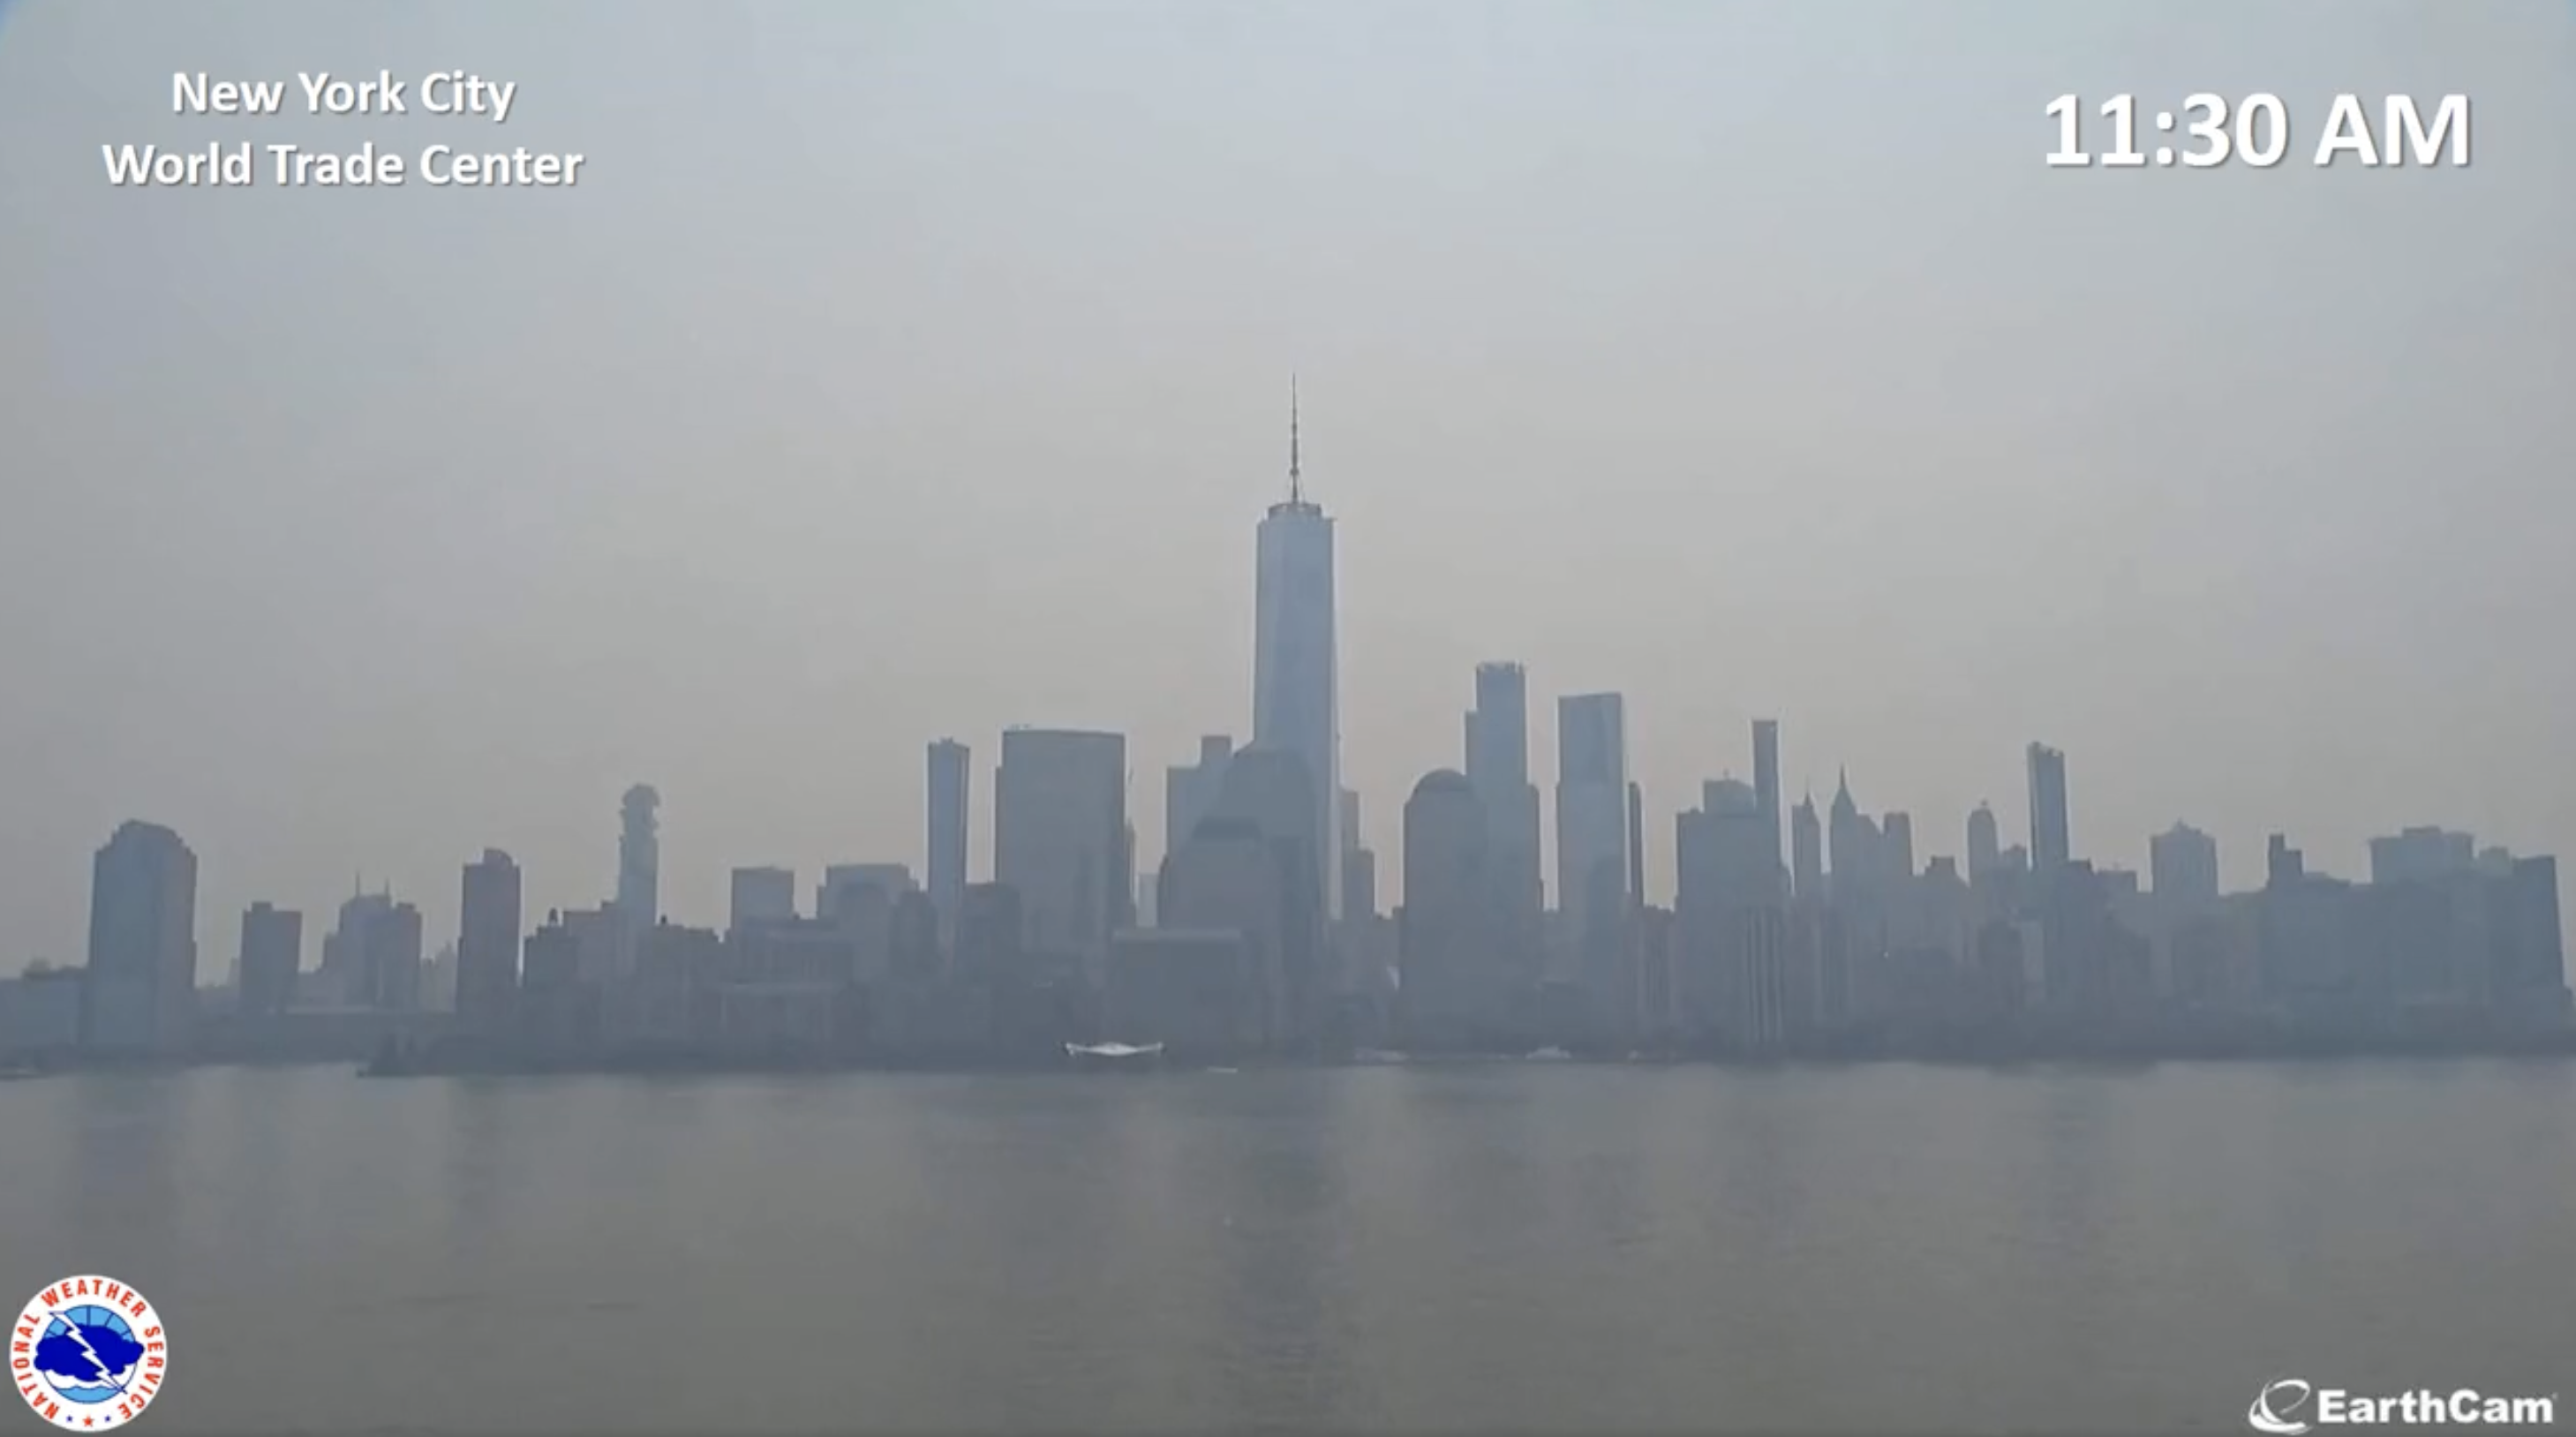 View of the downtown Manhattan skyline at 11:30 am, with the sky foggy